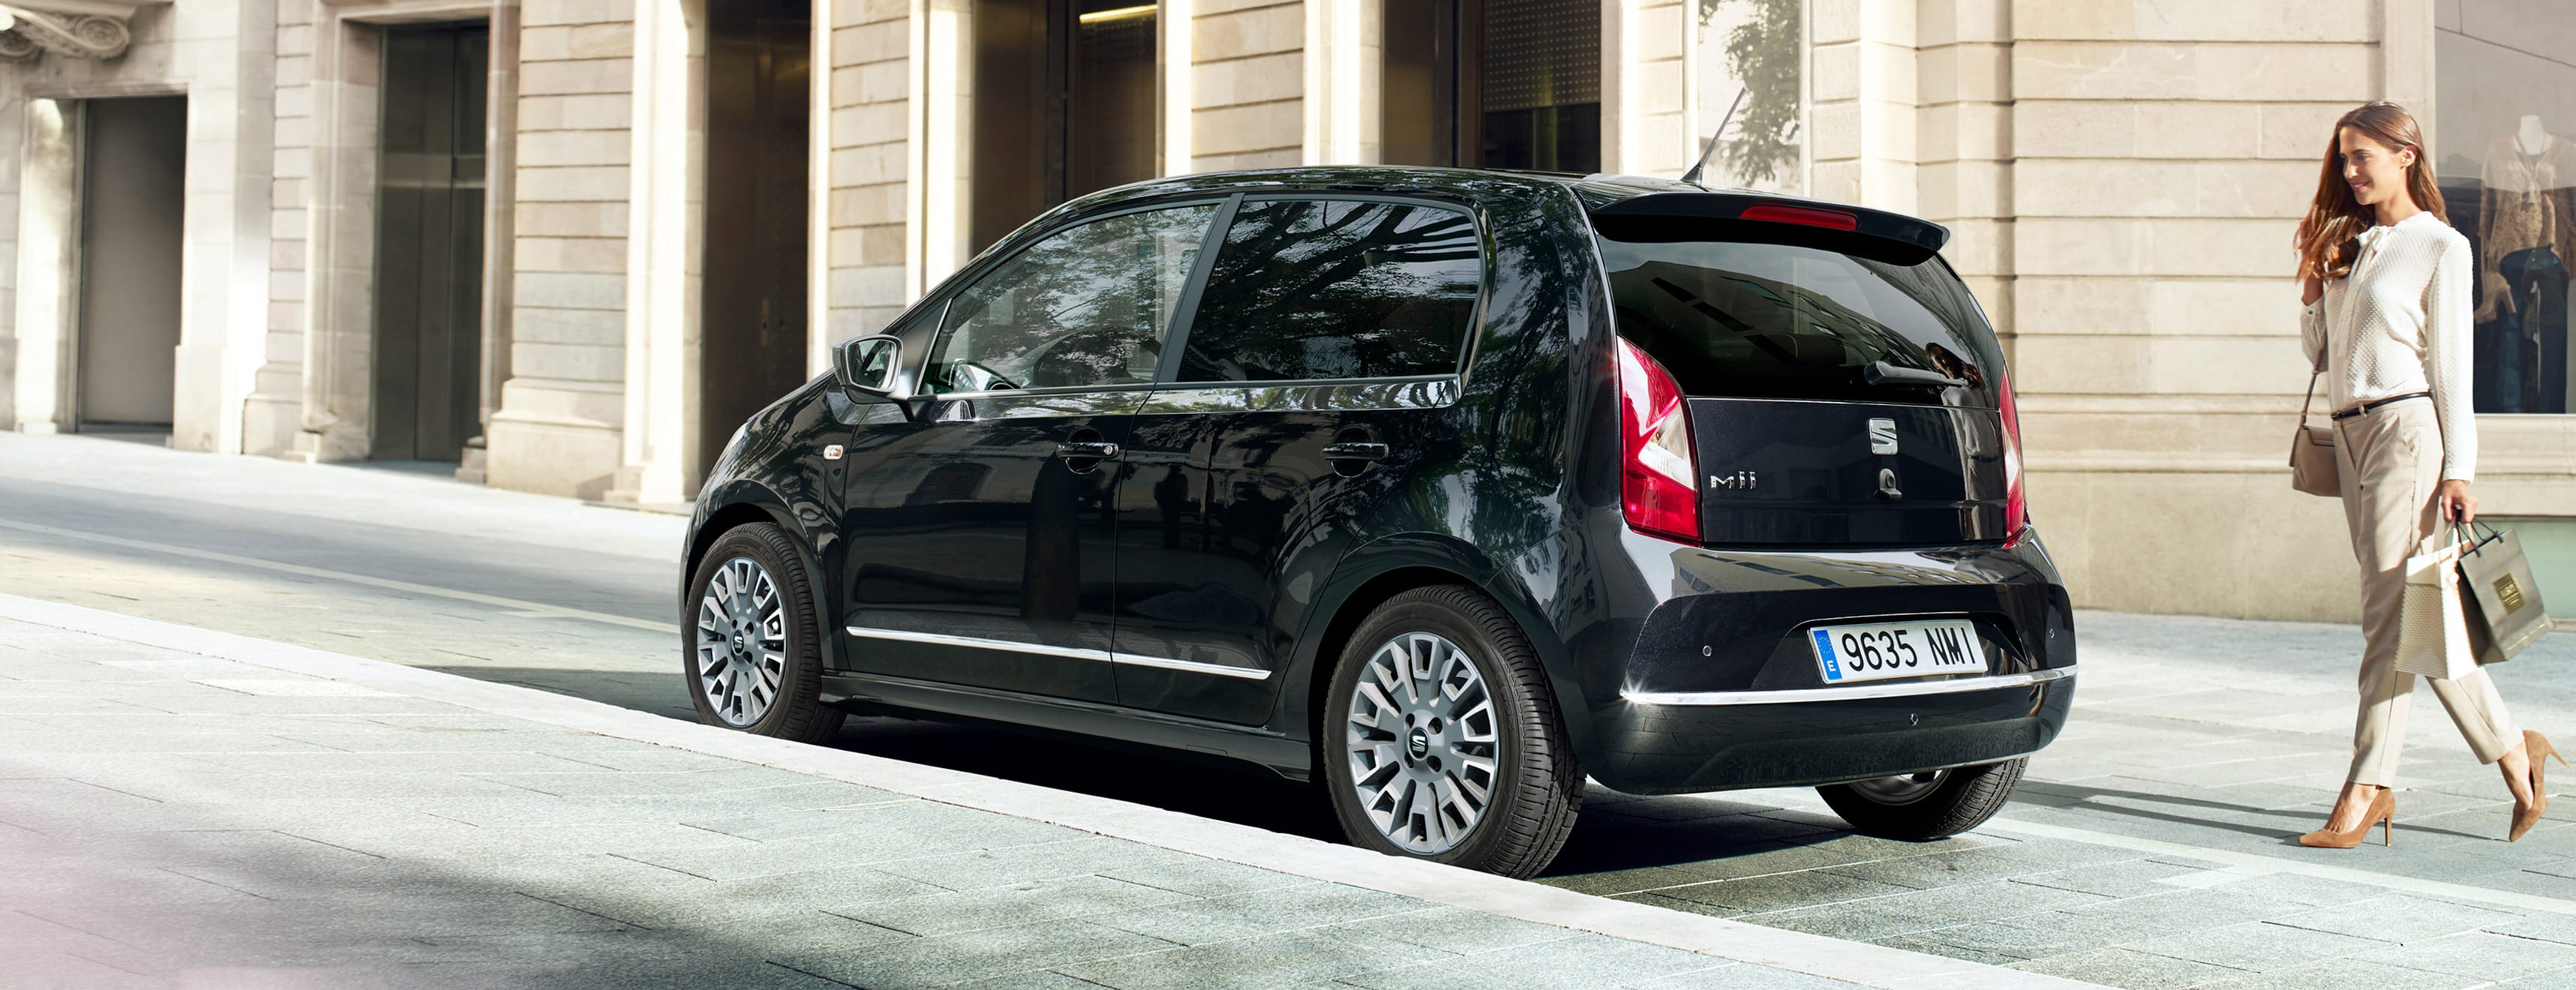 Deep black SEAT Mii urban exterior. Showing the Mii's doors and rear style 